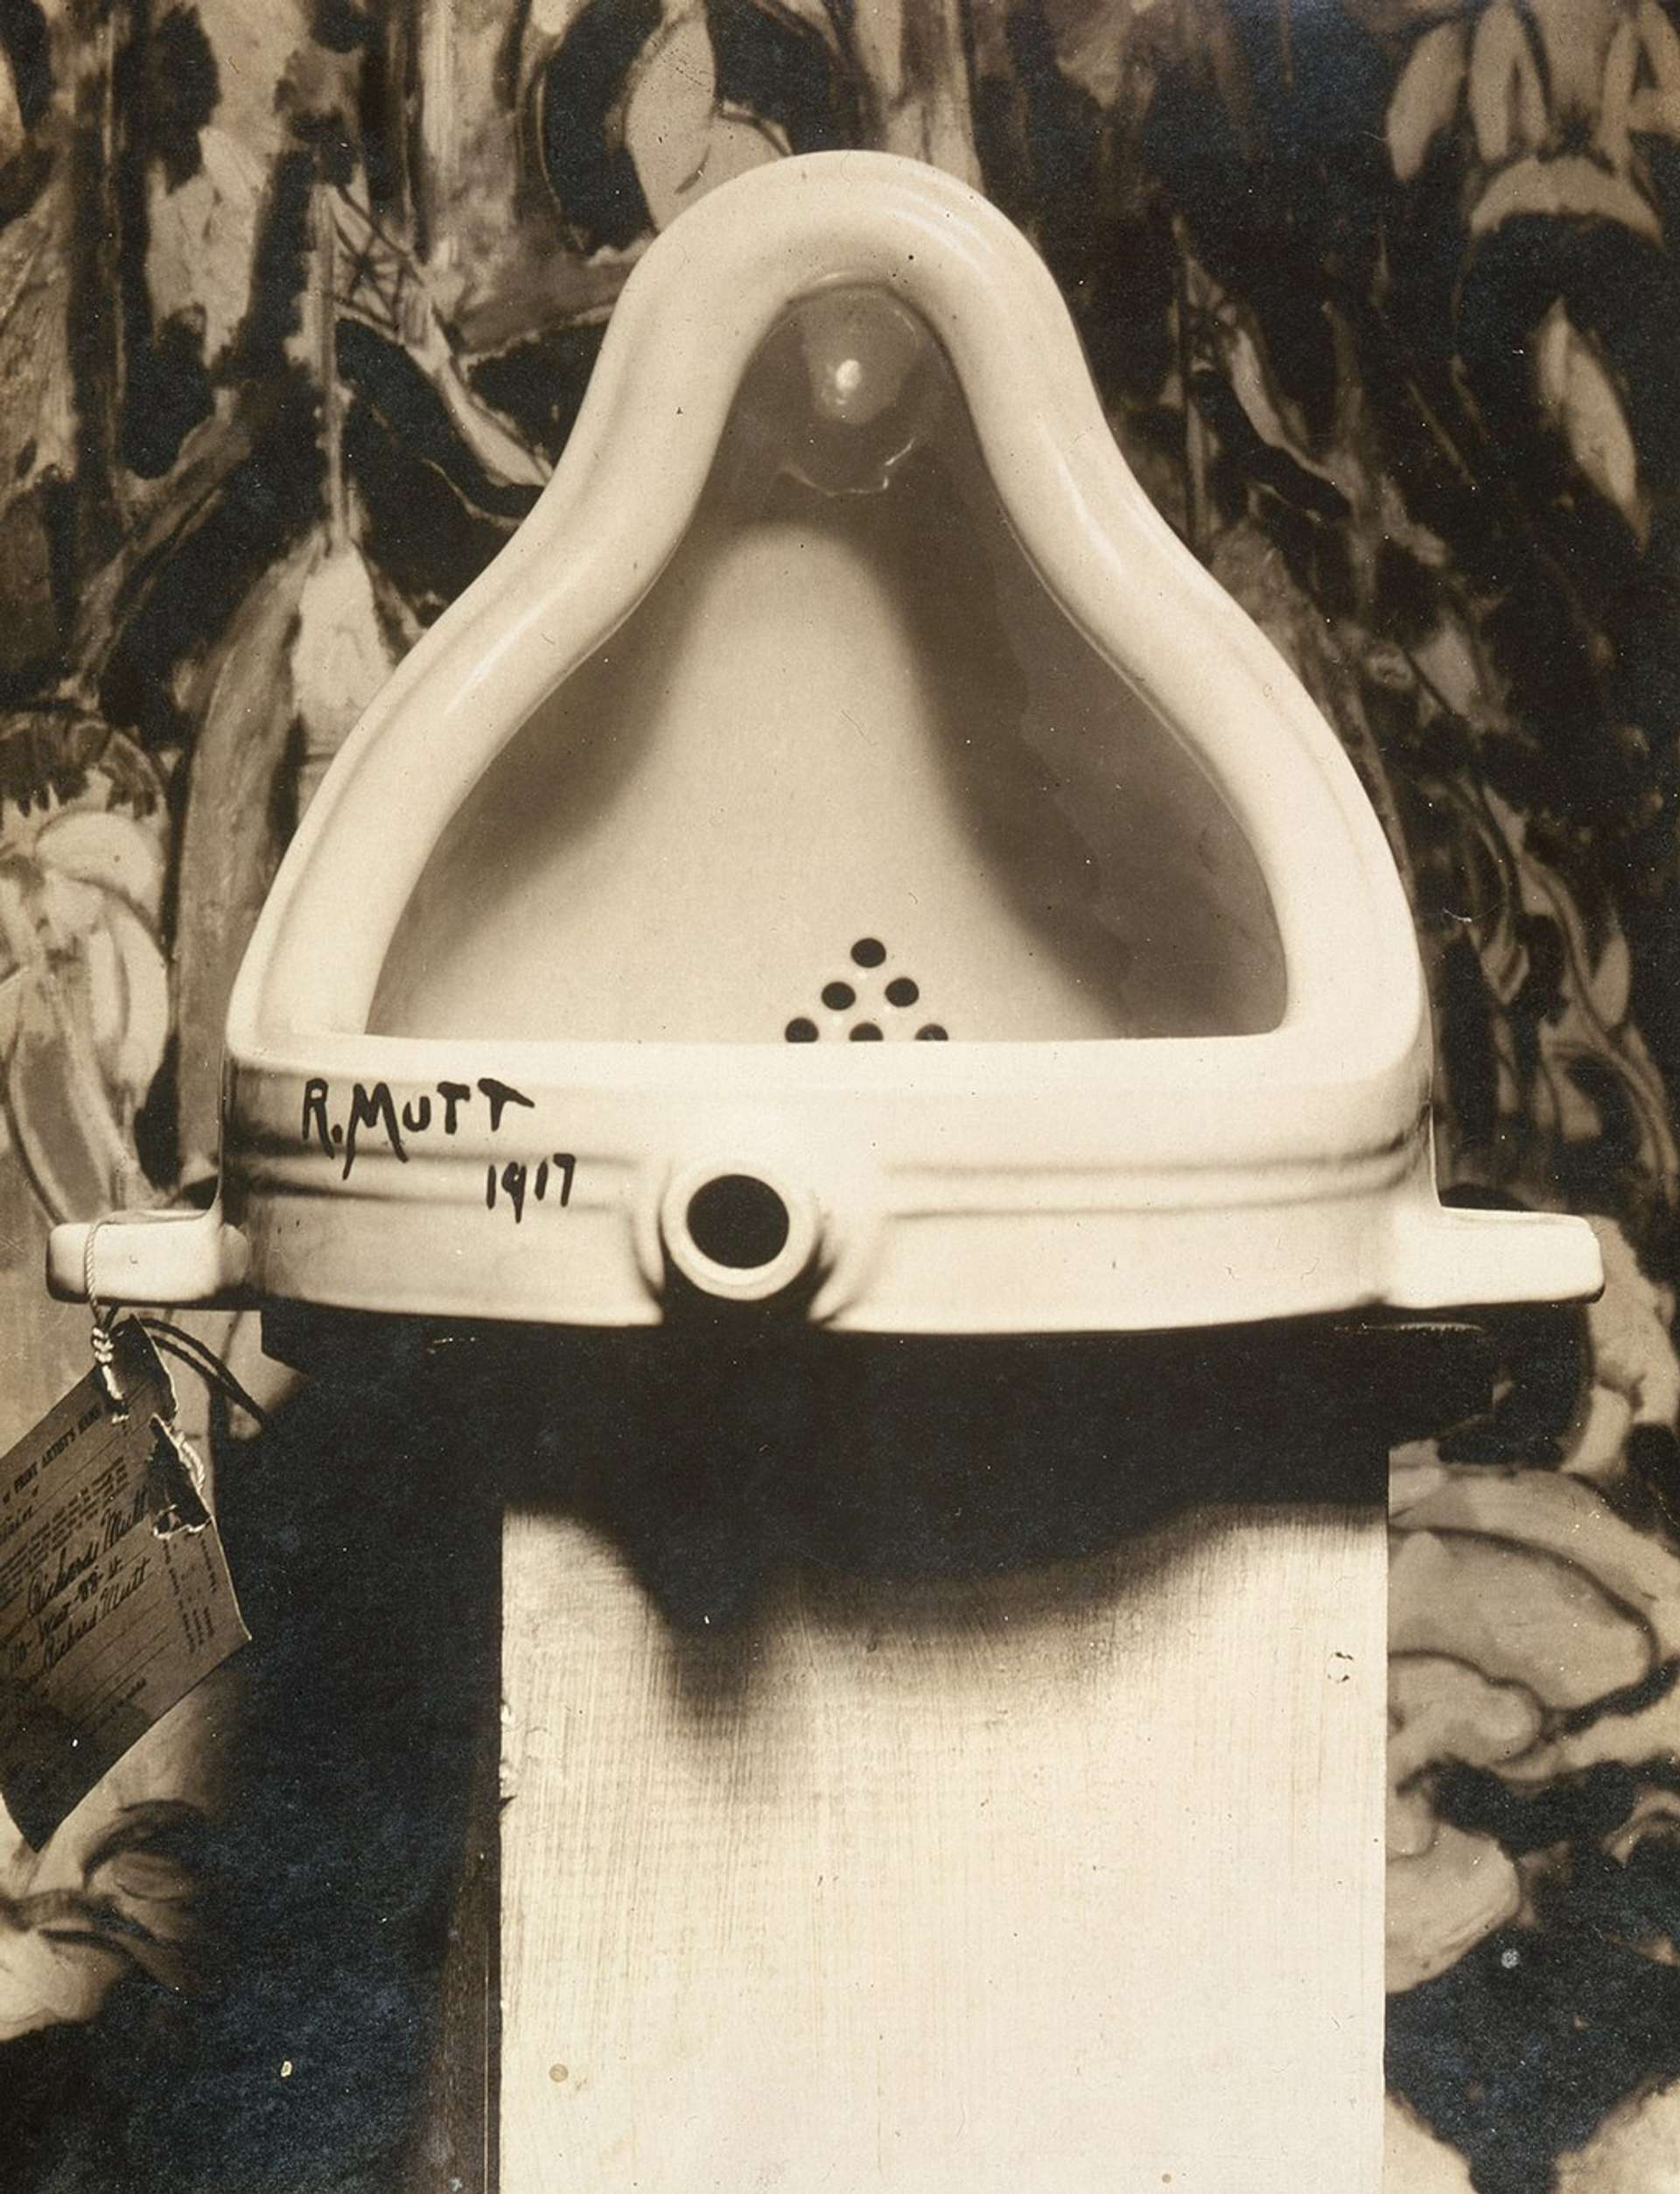 n image of the urinal that became Fountain by Marcel Duchamp. It is a white urinal, with the signature R. Mutt 1917 on the bottom left corner.